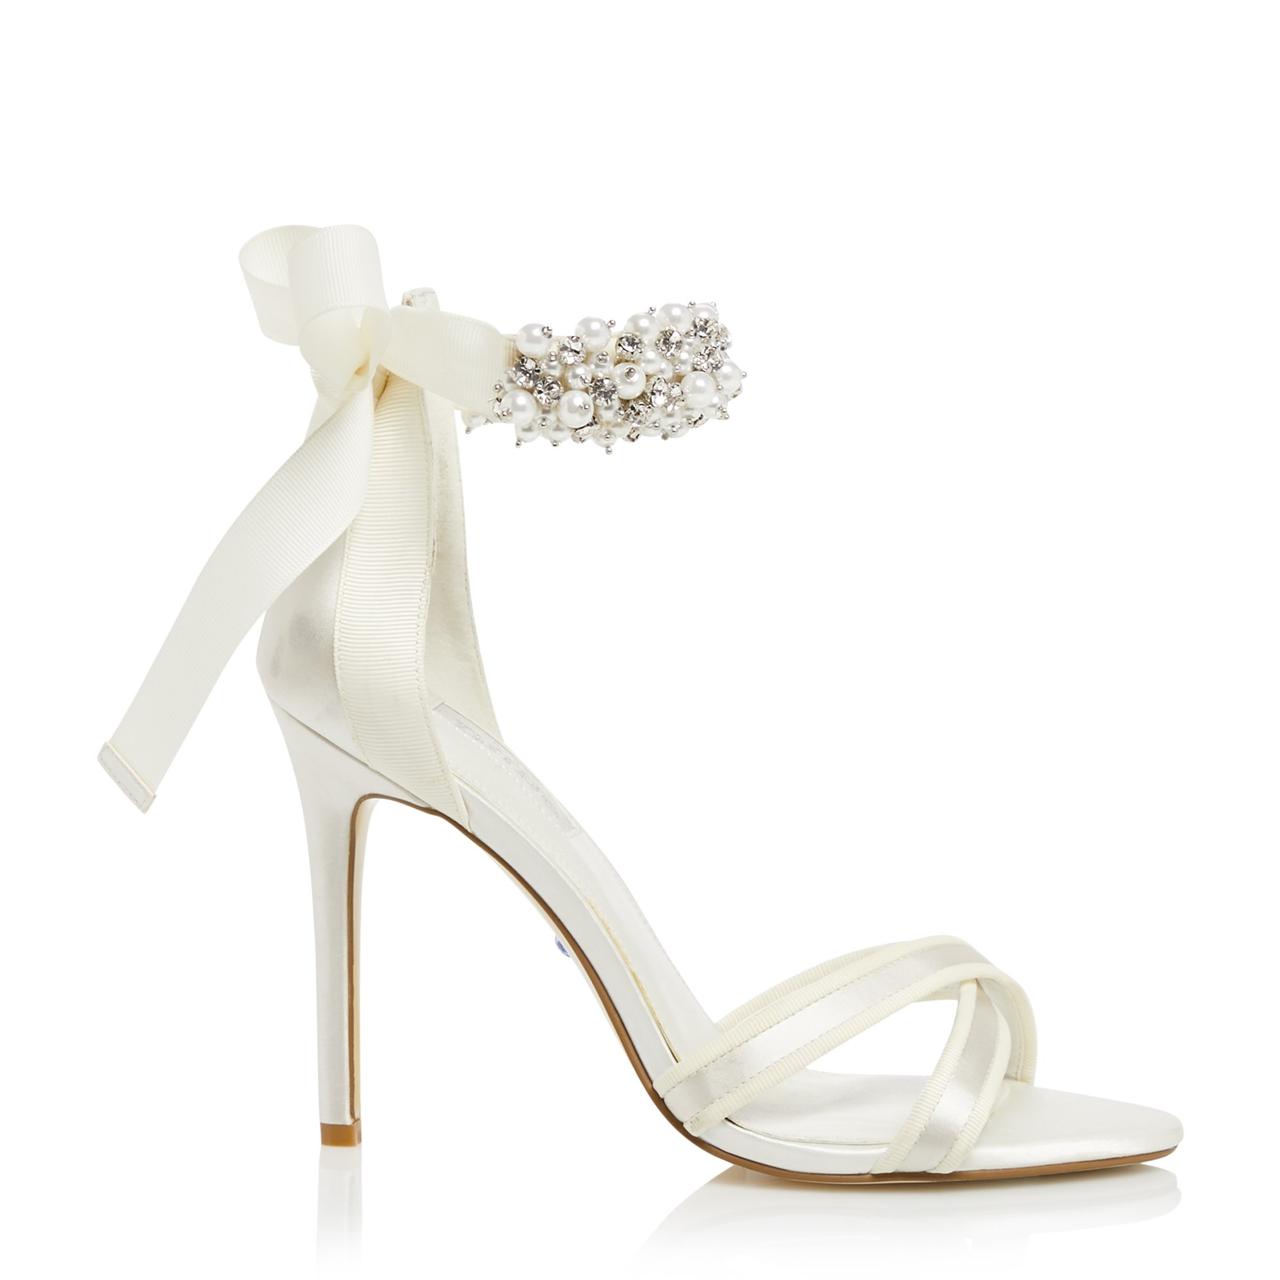 Can a Bride Wear Sandals on the Wedding Day?